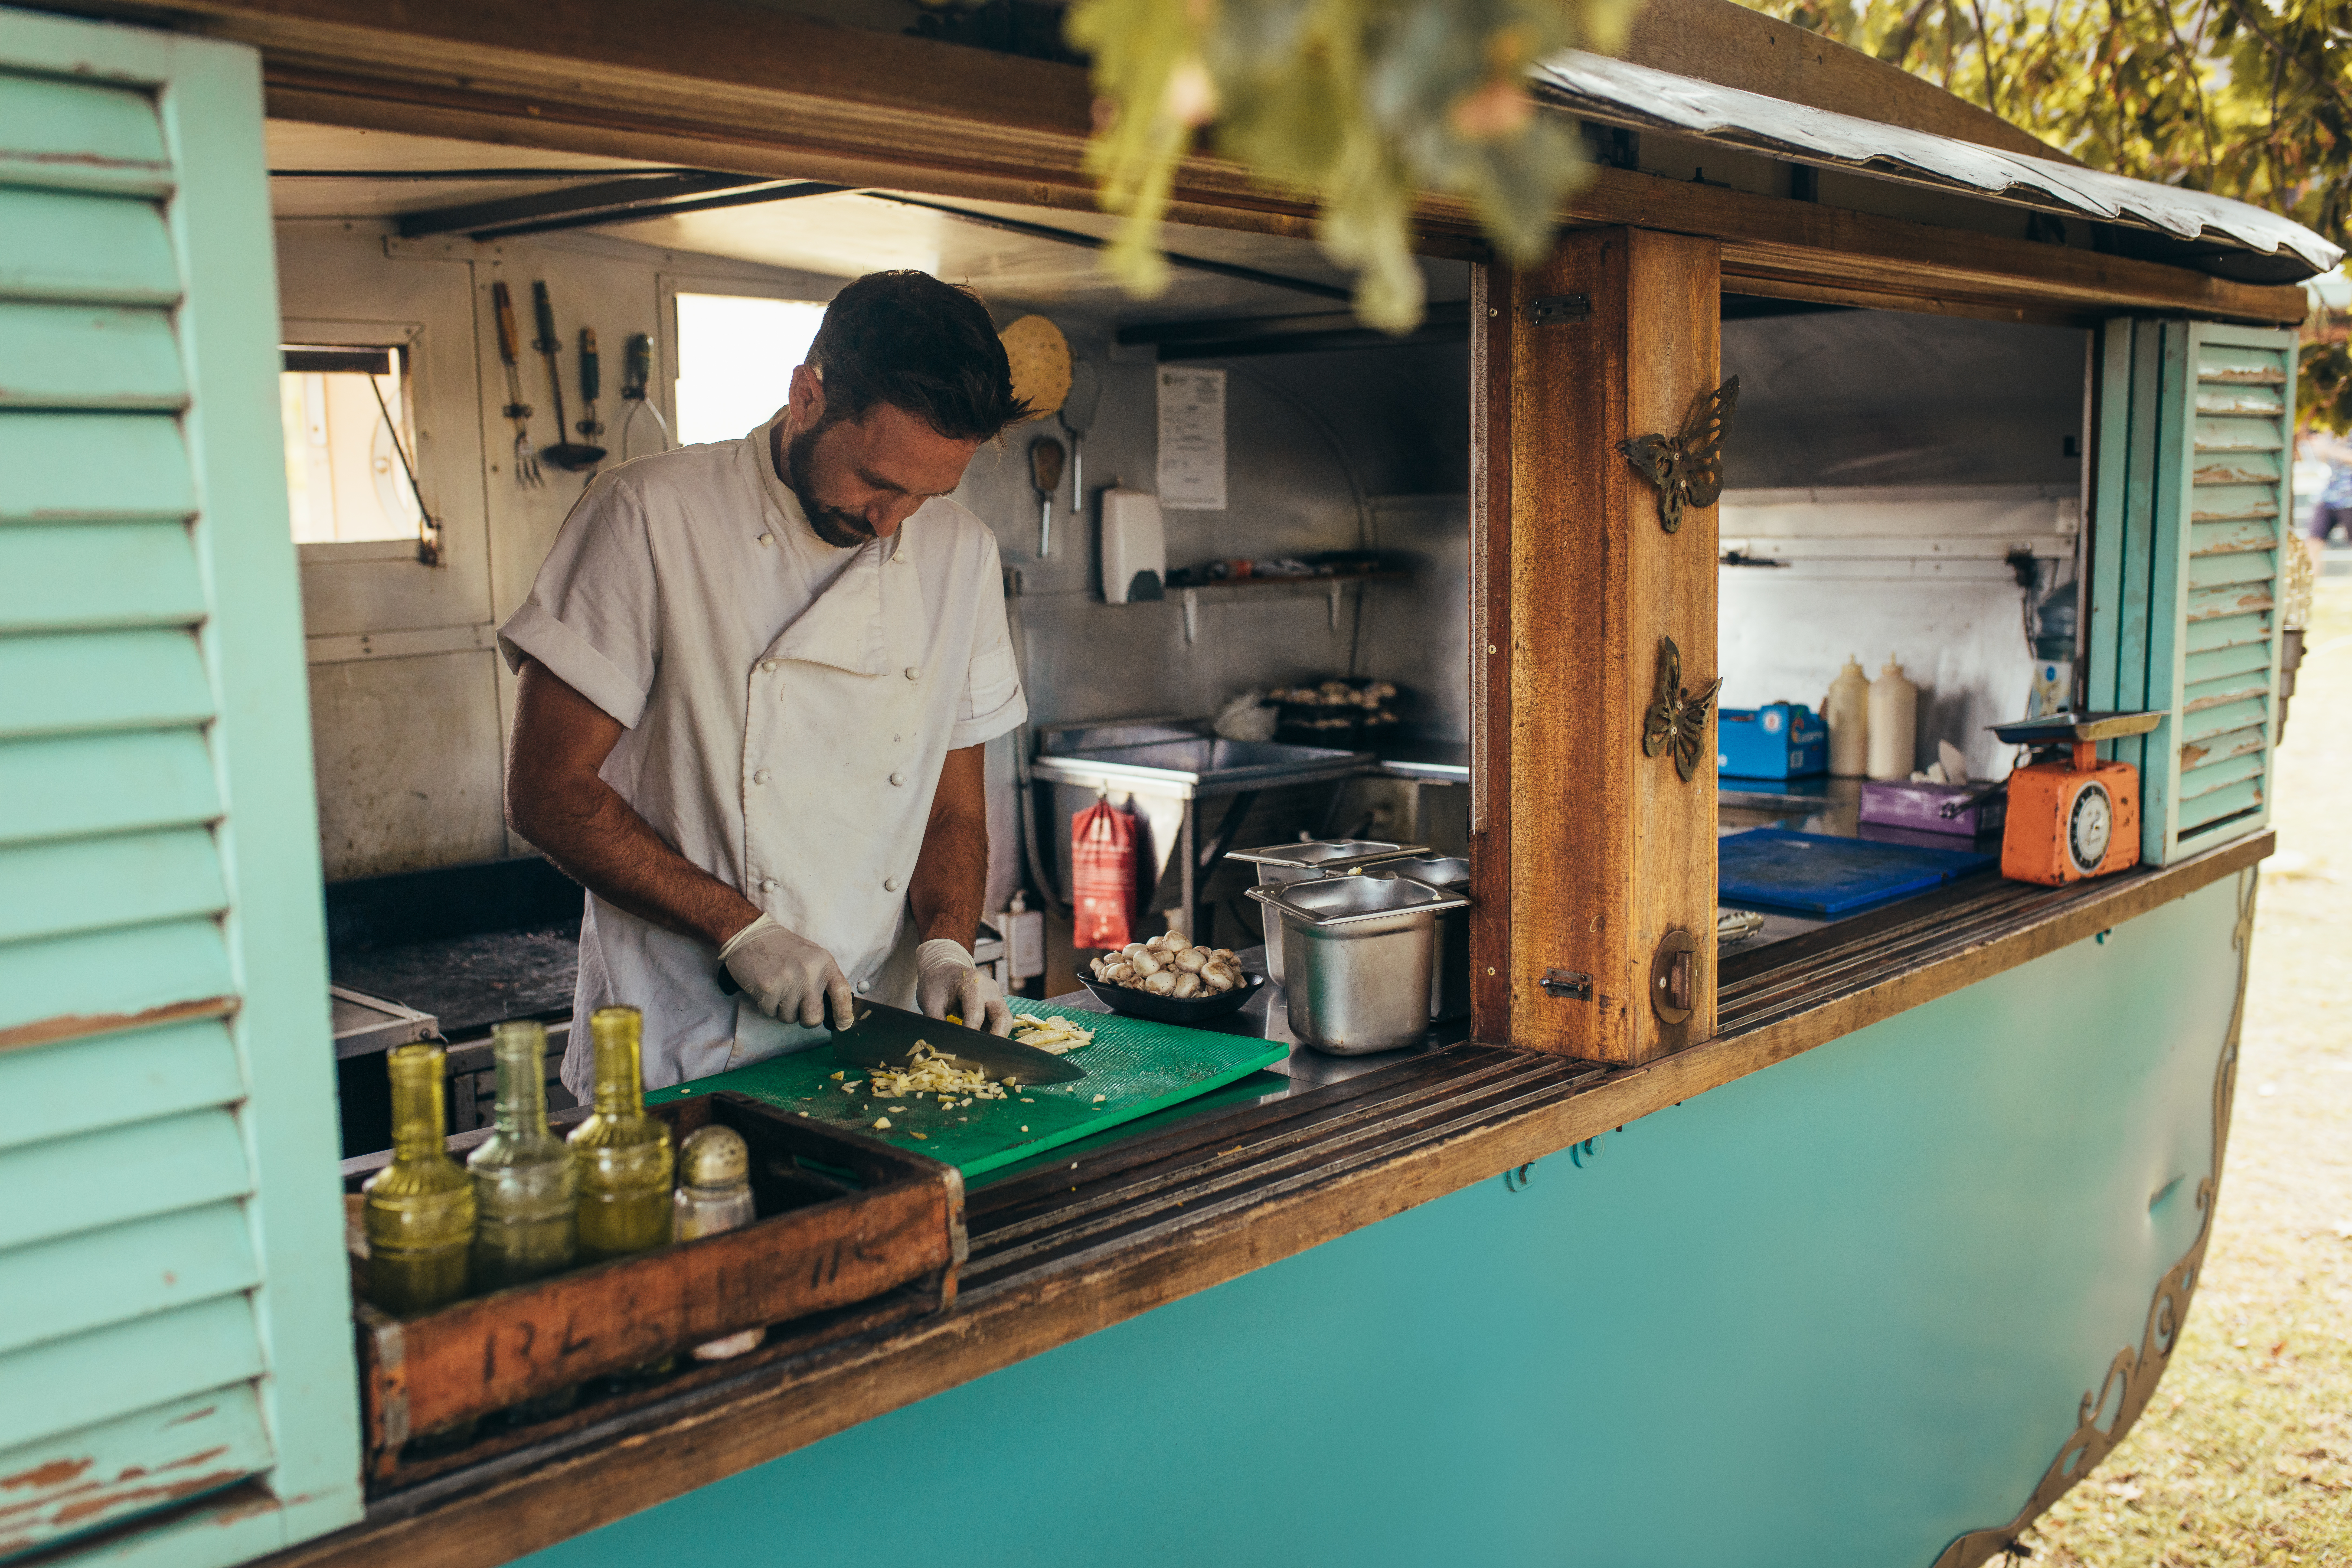 Taking Business On the Road: The Top Benefits of Starting a Food Truck Business